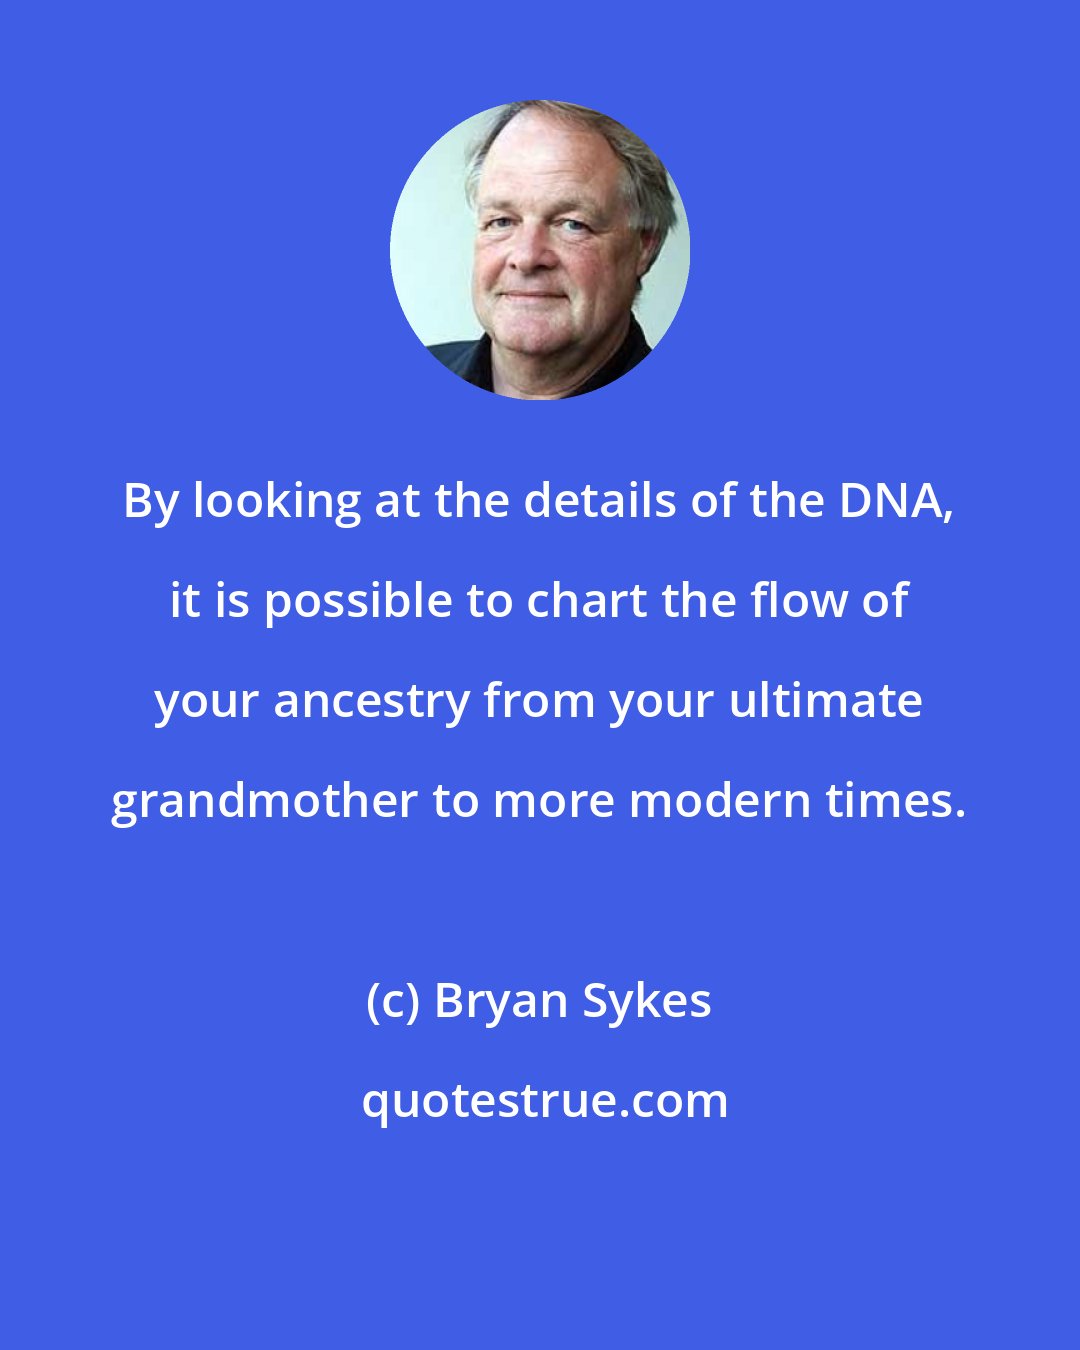 Bryan Sykes: By looking at the details of the DNA, it is possible to chart the flow of your ancestry from your ultimate grandmother to more modern times.